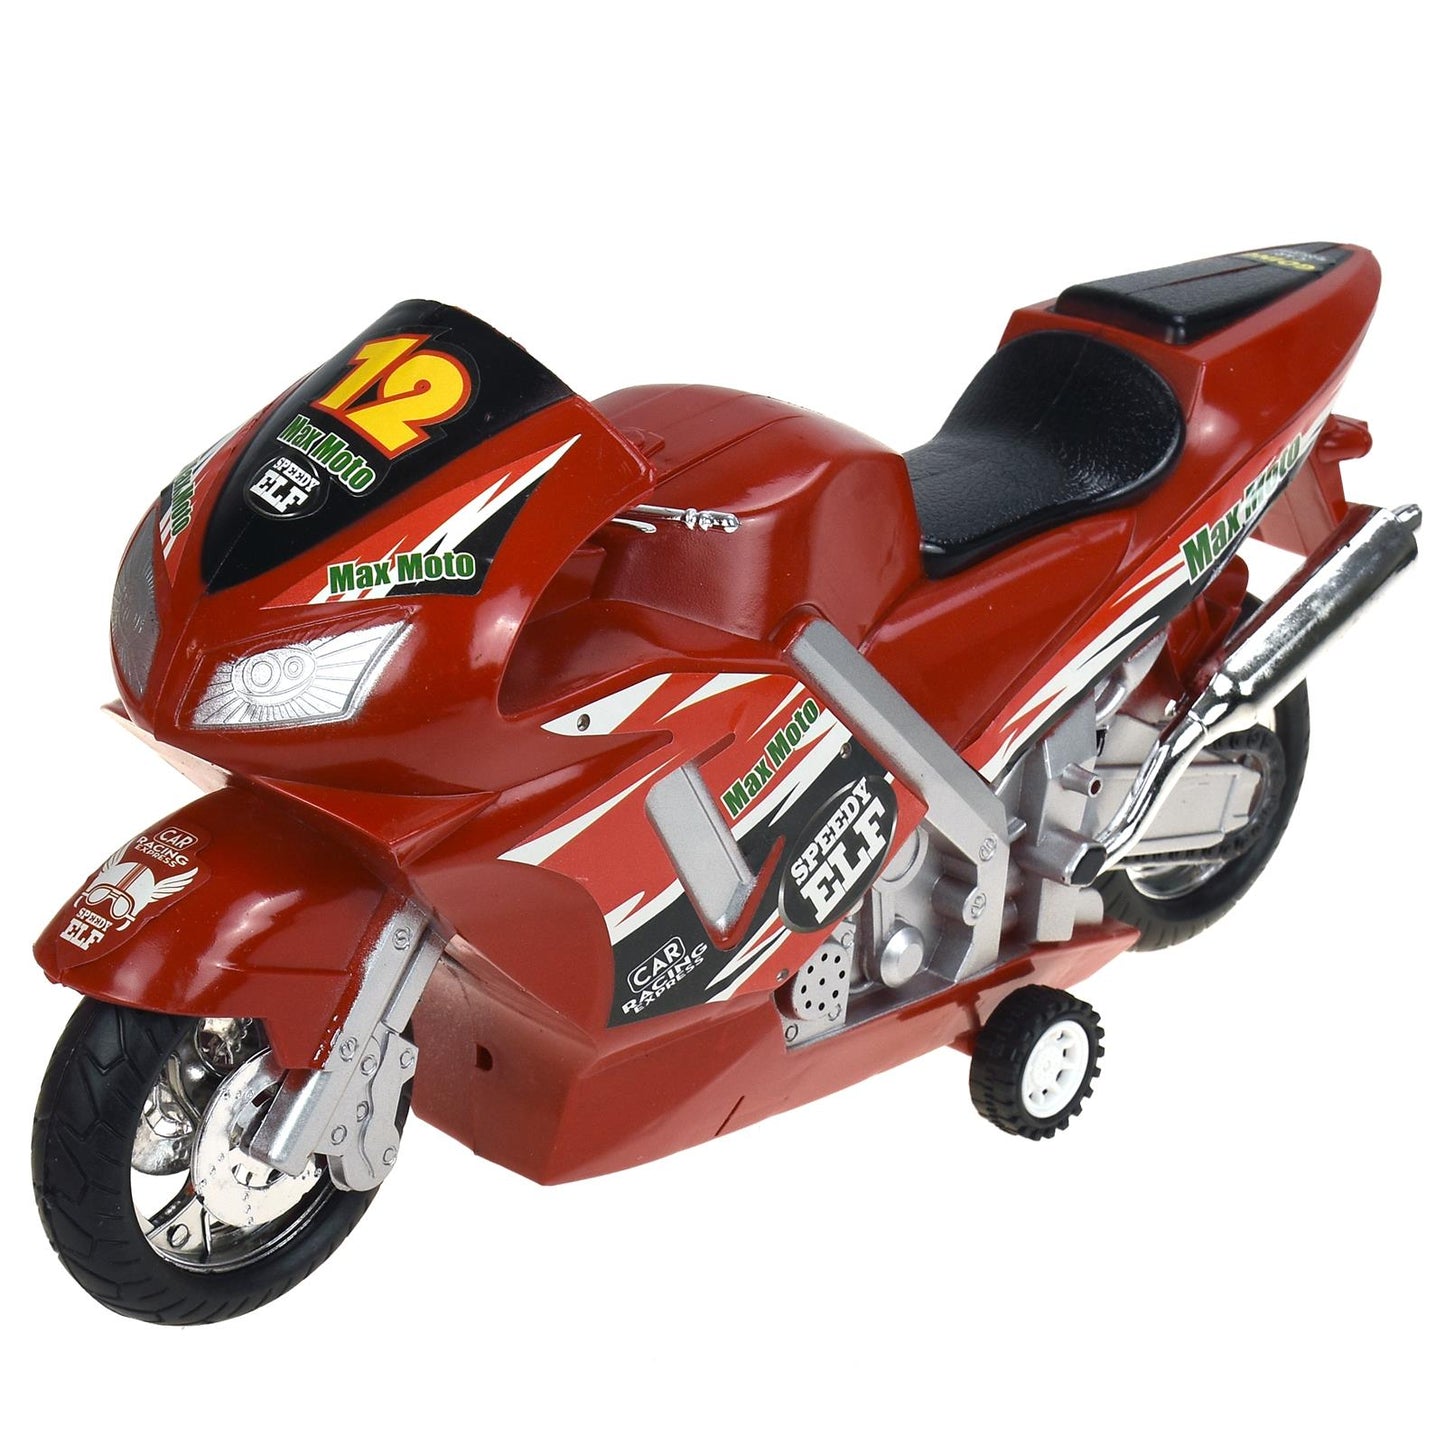 Add Some Quirky Charm with Elf Motorbike Selection Ornament